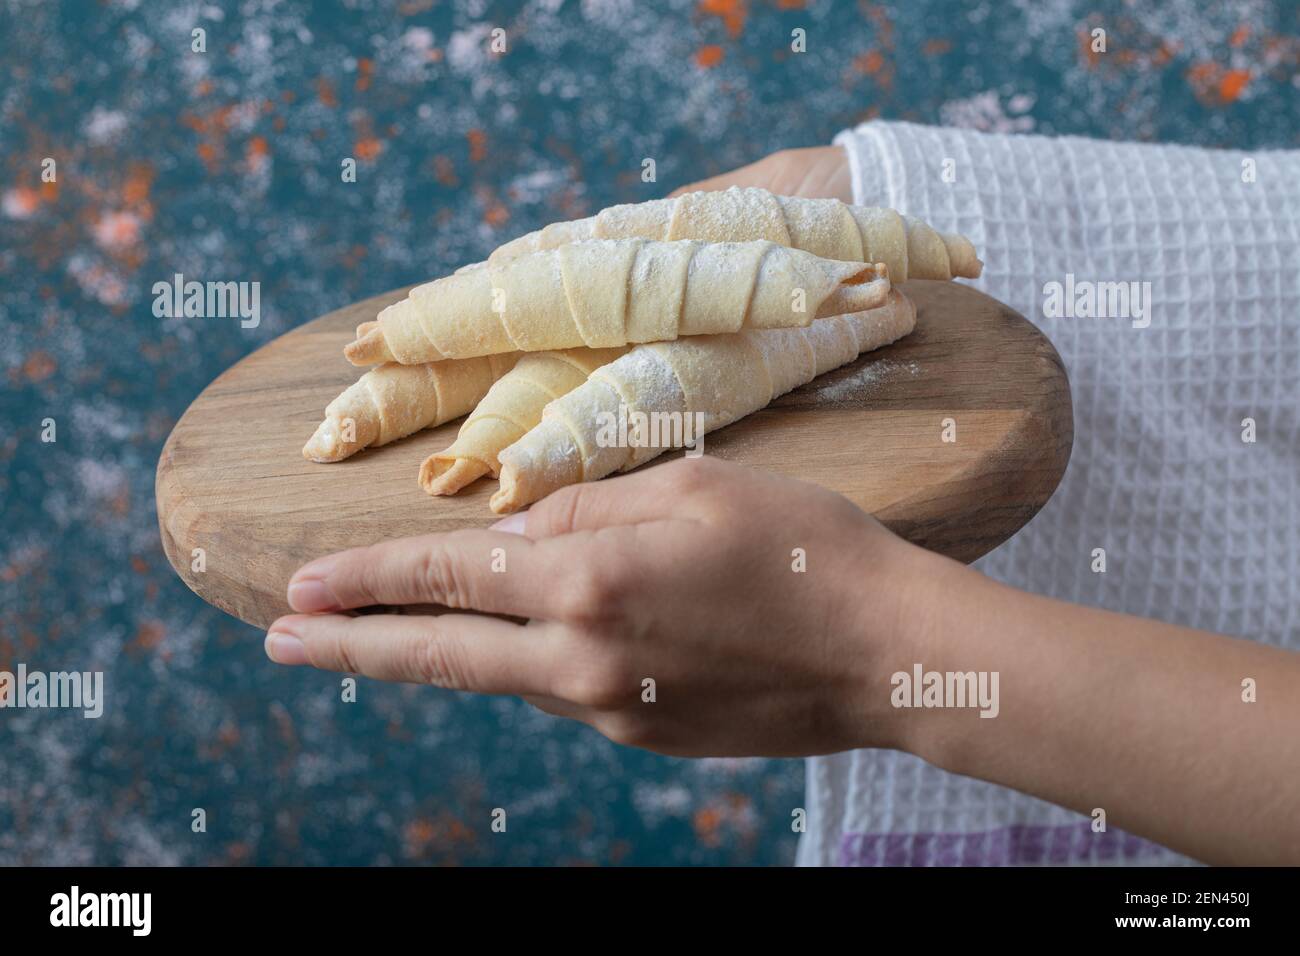 Holding mutaki cookies on a wooden board in the hand Stock Photo